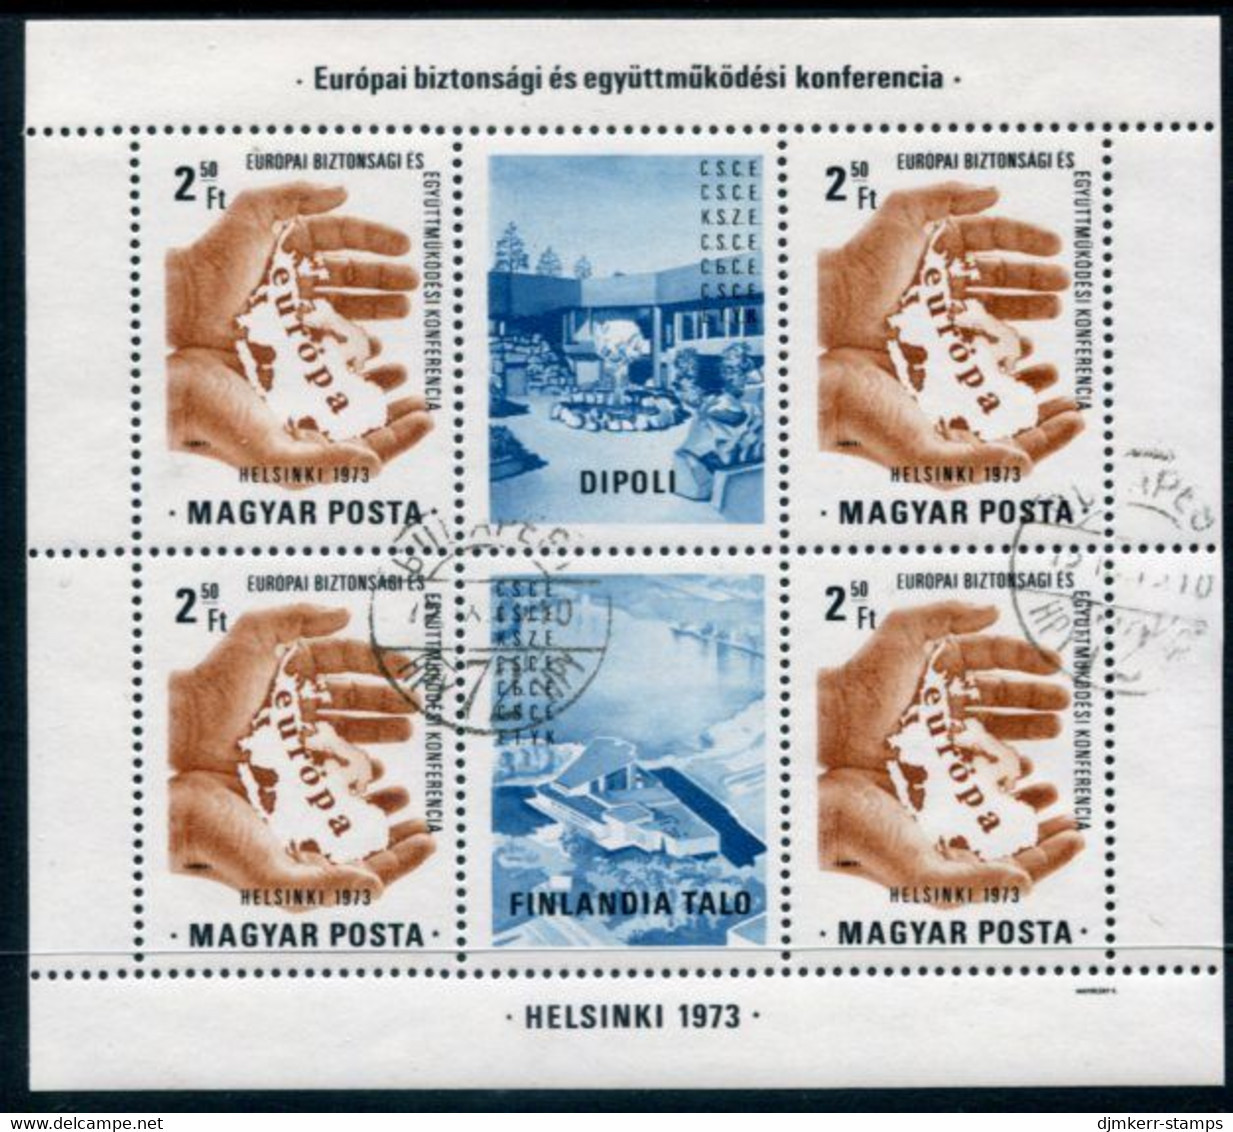 HUNGARY 1973 European Security Conference Block Used.  Michel Block 99 - Gebraucht